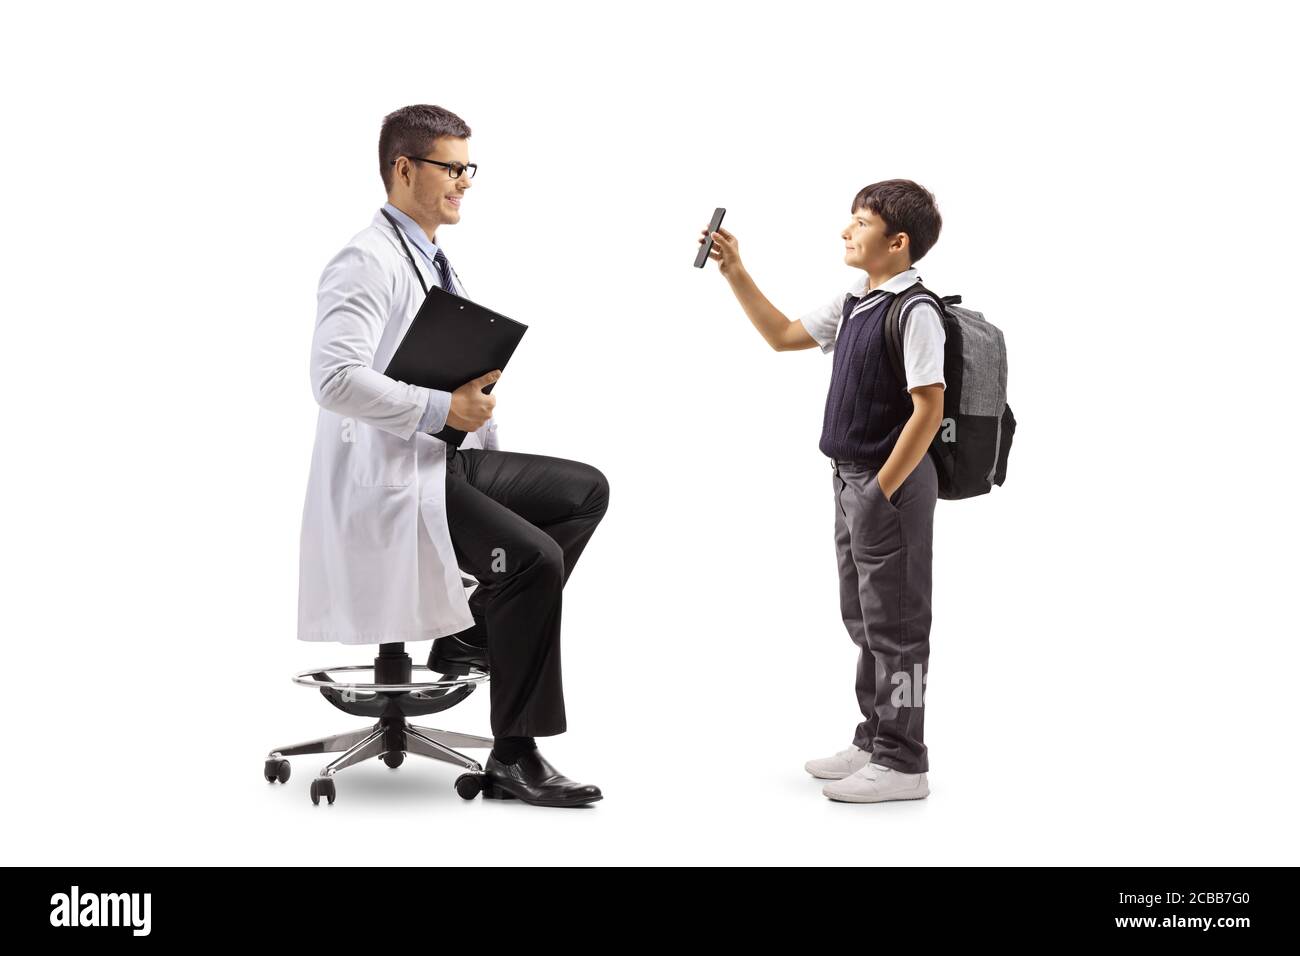 Full length profile shot of a schoolboy standing and showing a mobile phone to a male doctor seated on a chair isolated on white background Stock Photo